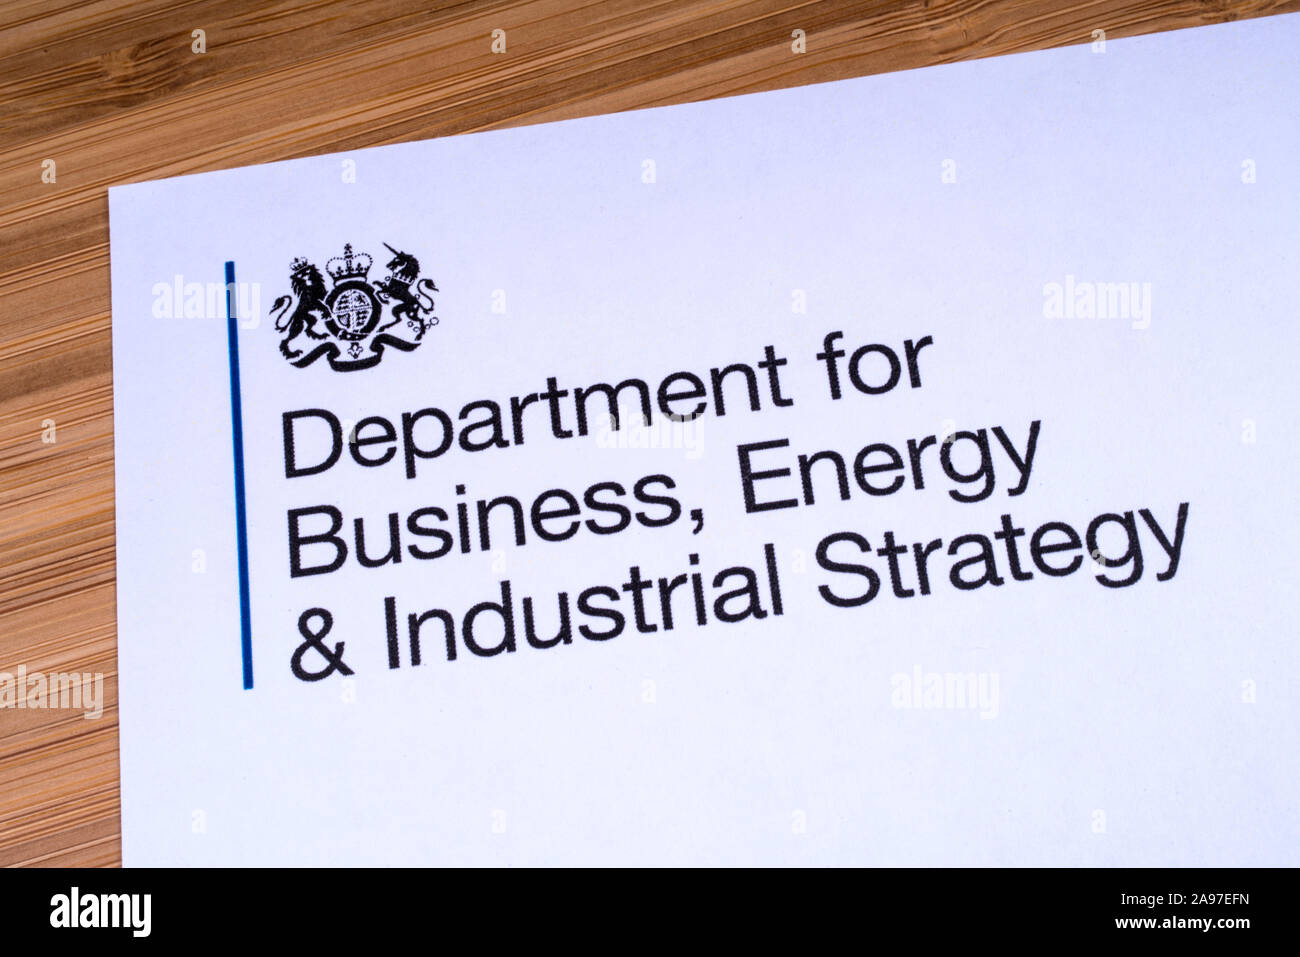 London, UK - March 12th 2019: Close-up of the logo for the Department for Business, Energy and Industrial Strategy, pictured on a piece of paper or le Stock Photo